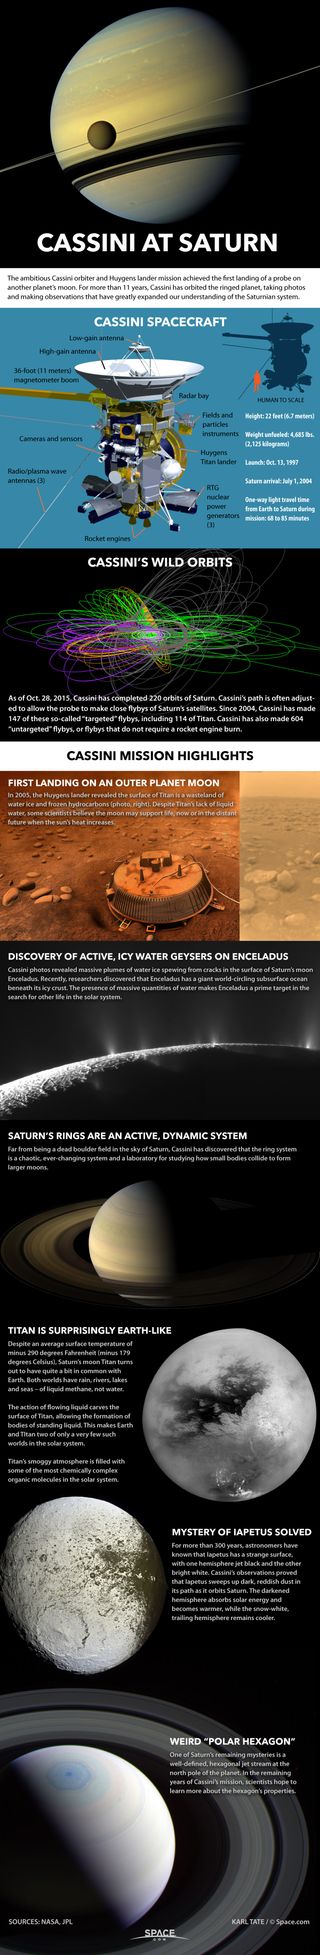 Details Cassini space probe and its discoveries.